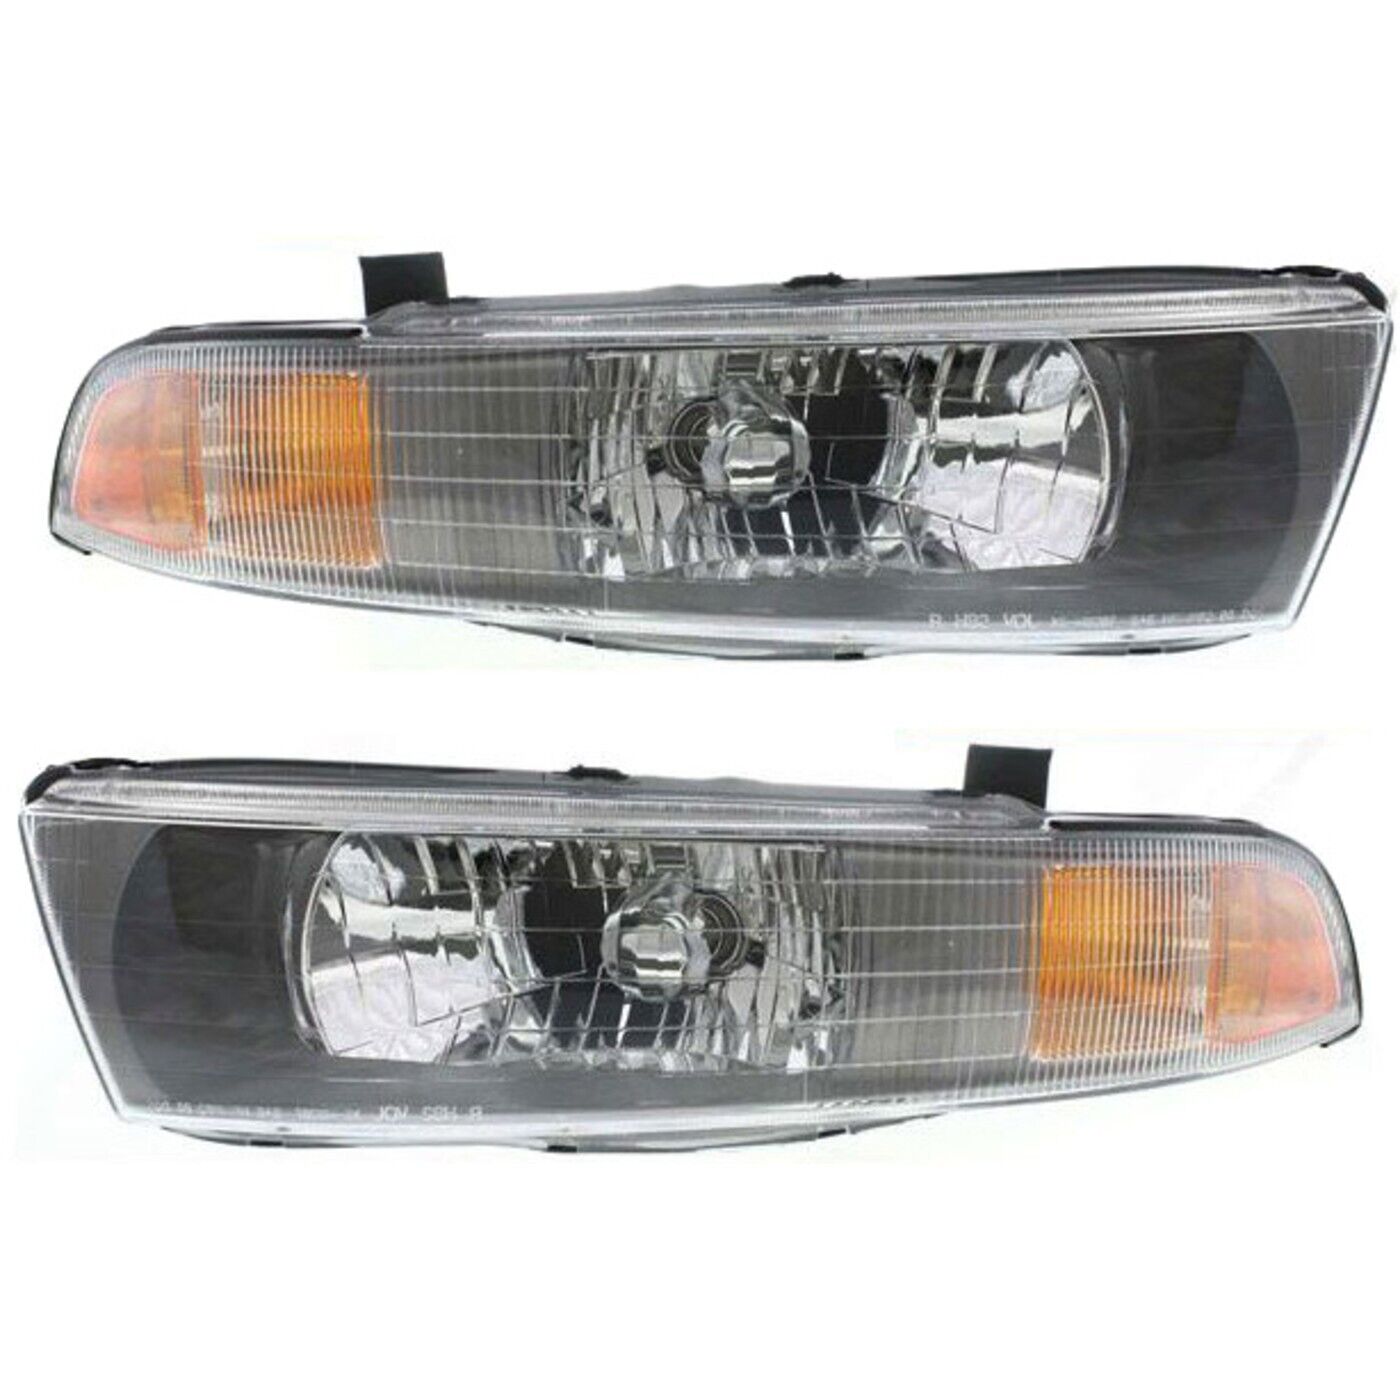 Headlight Set For 2002-2003 Mitsubishi Galant Left and Right With Bulb 2Pc